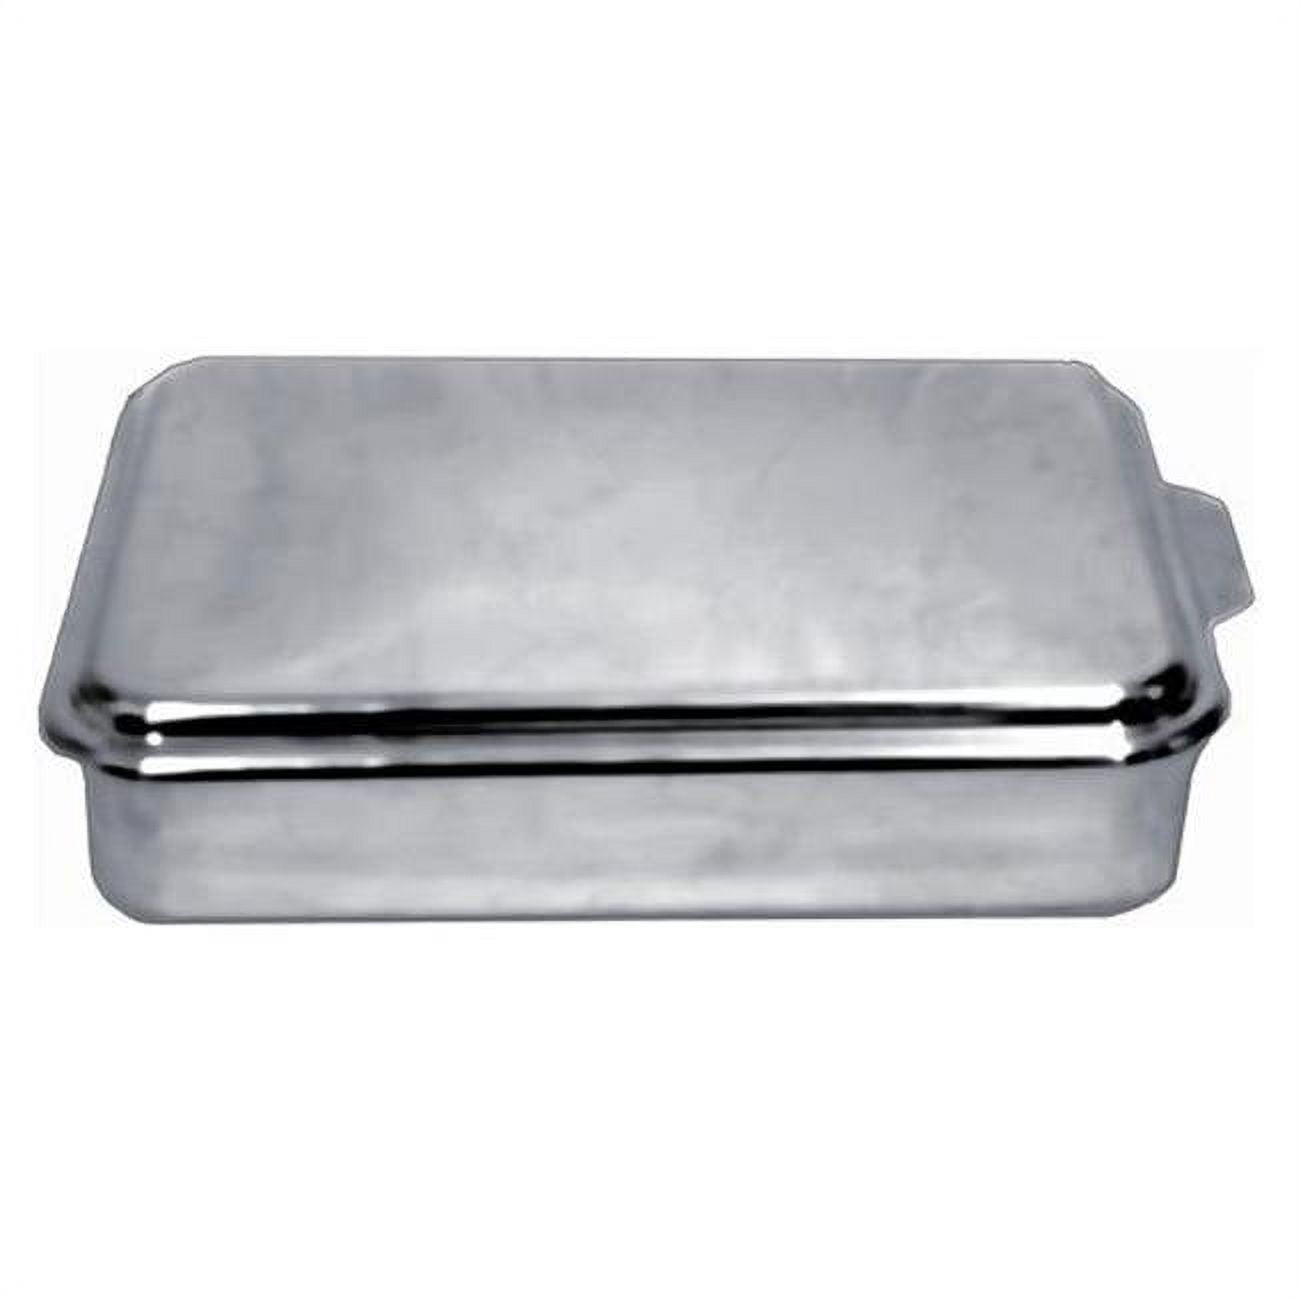 Lindy's Stainless Steel 9 X 13 Inches Covered Cake Pan, Silver